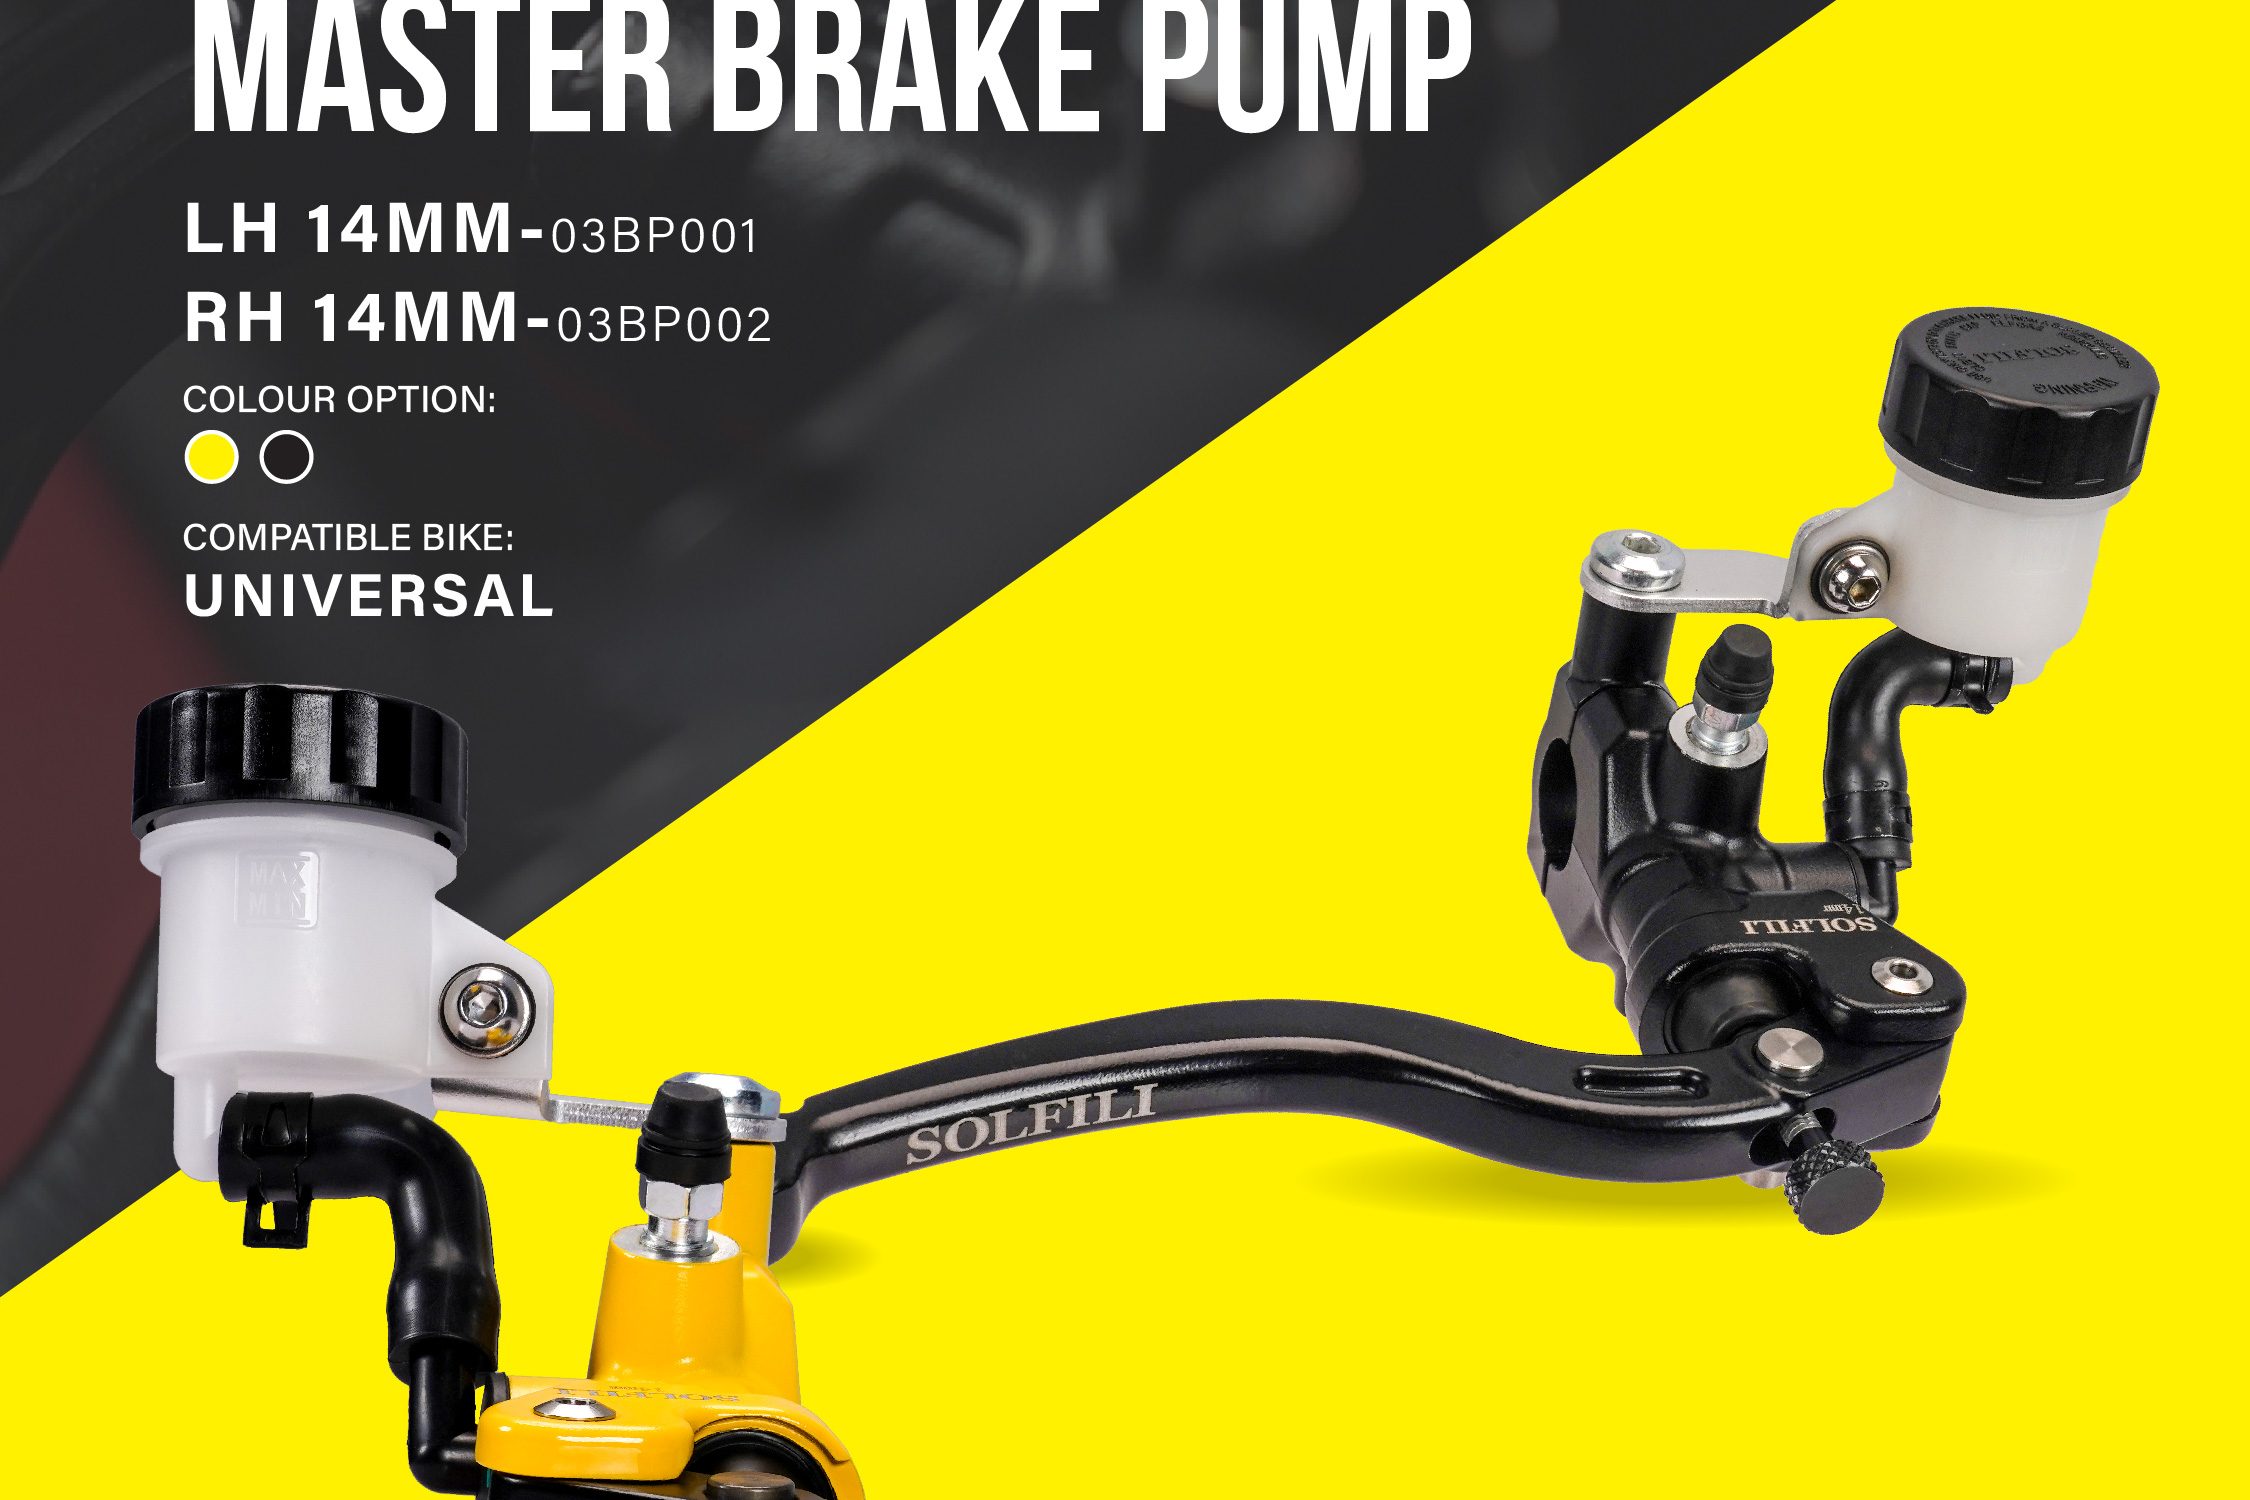 Axial Master Brake Pump or Radial Master Brake Pump? Which one is for you?